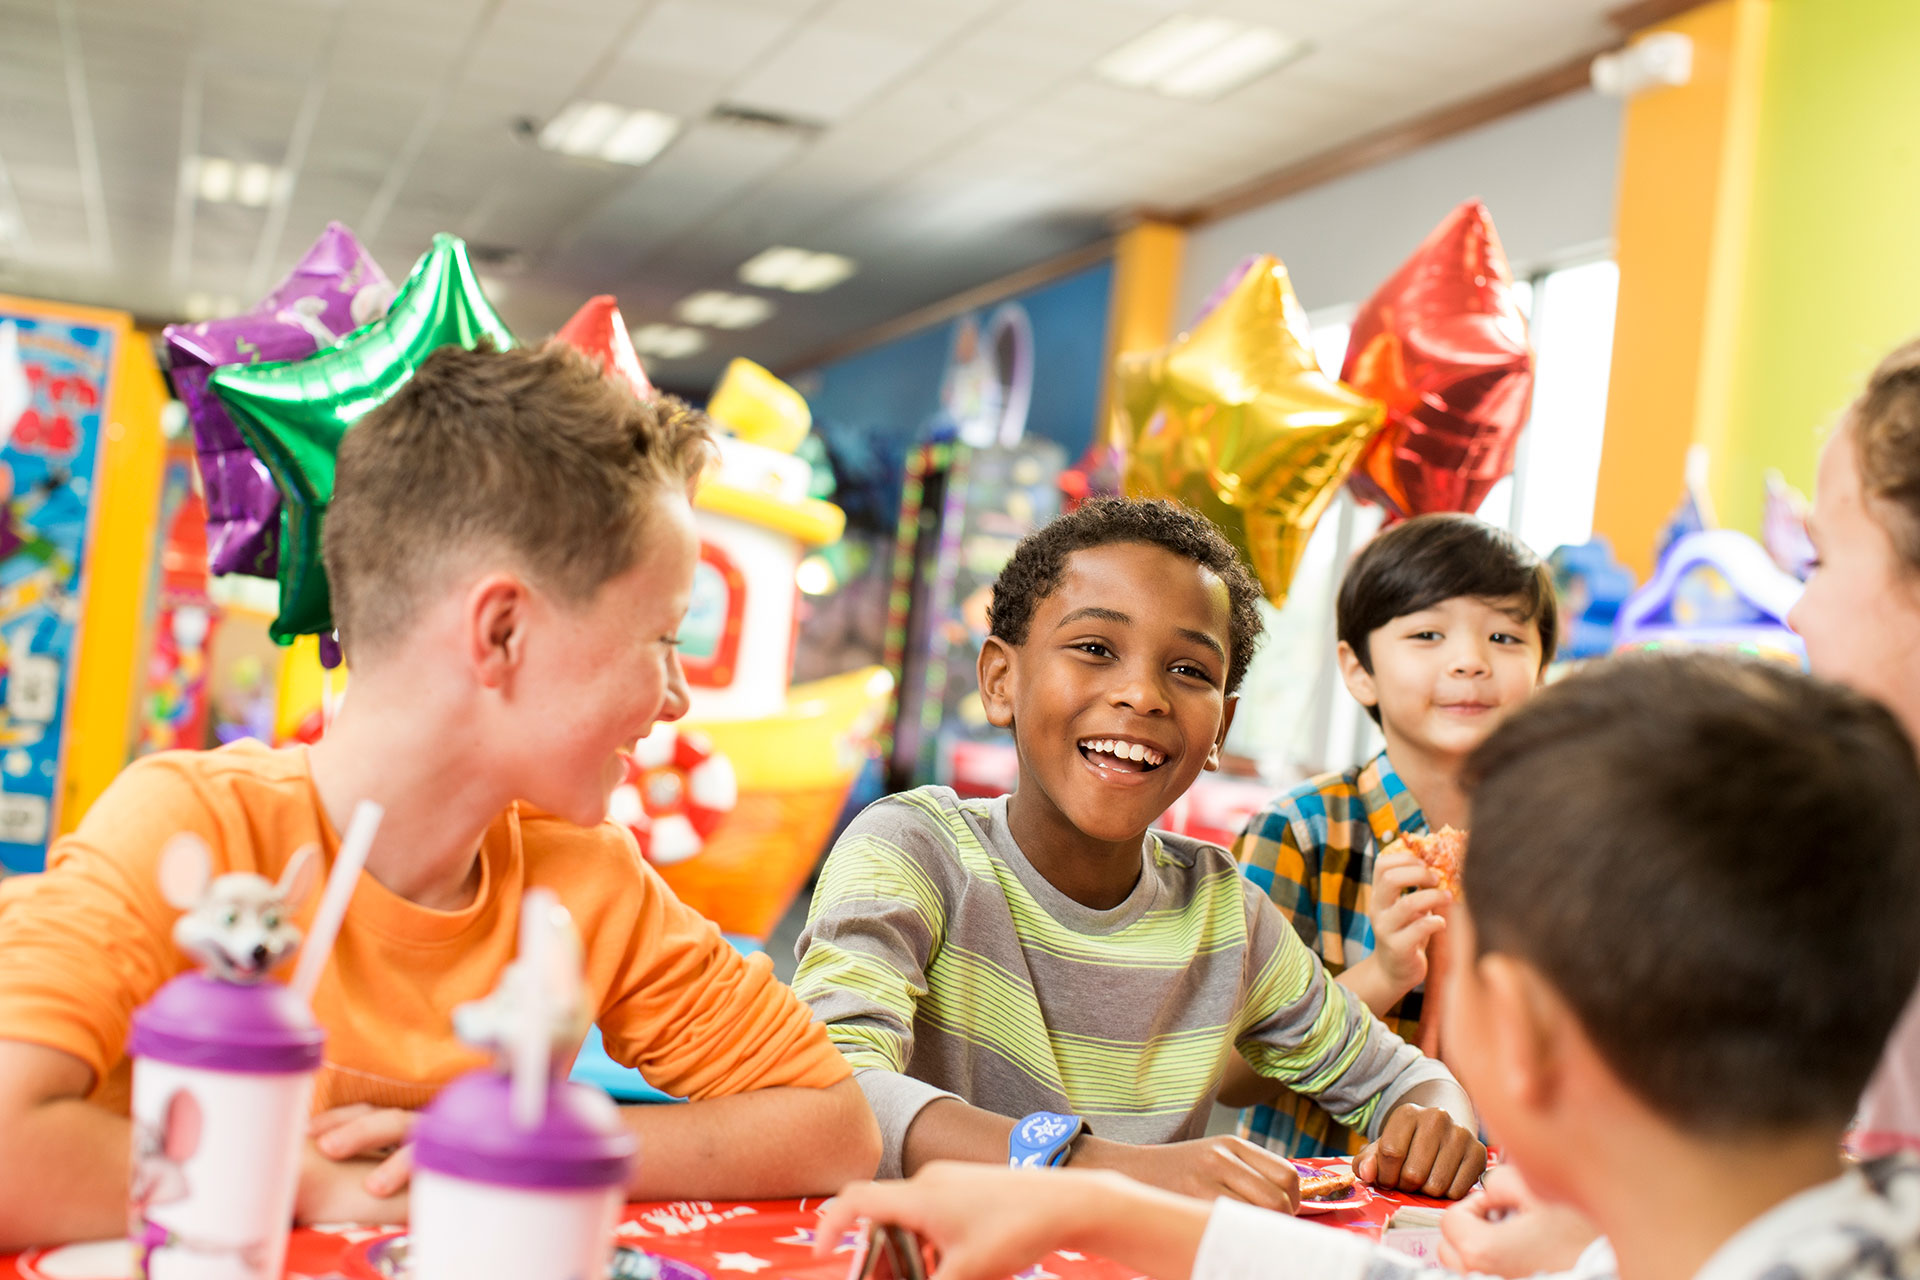 Kids around a table with balloons in the background